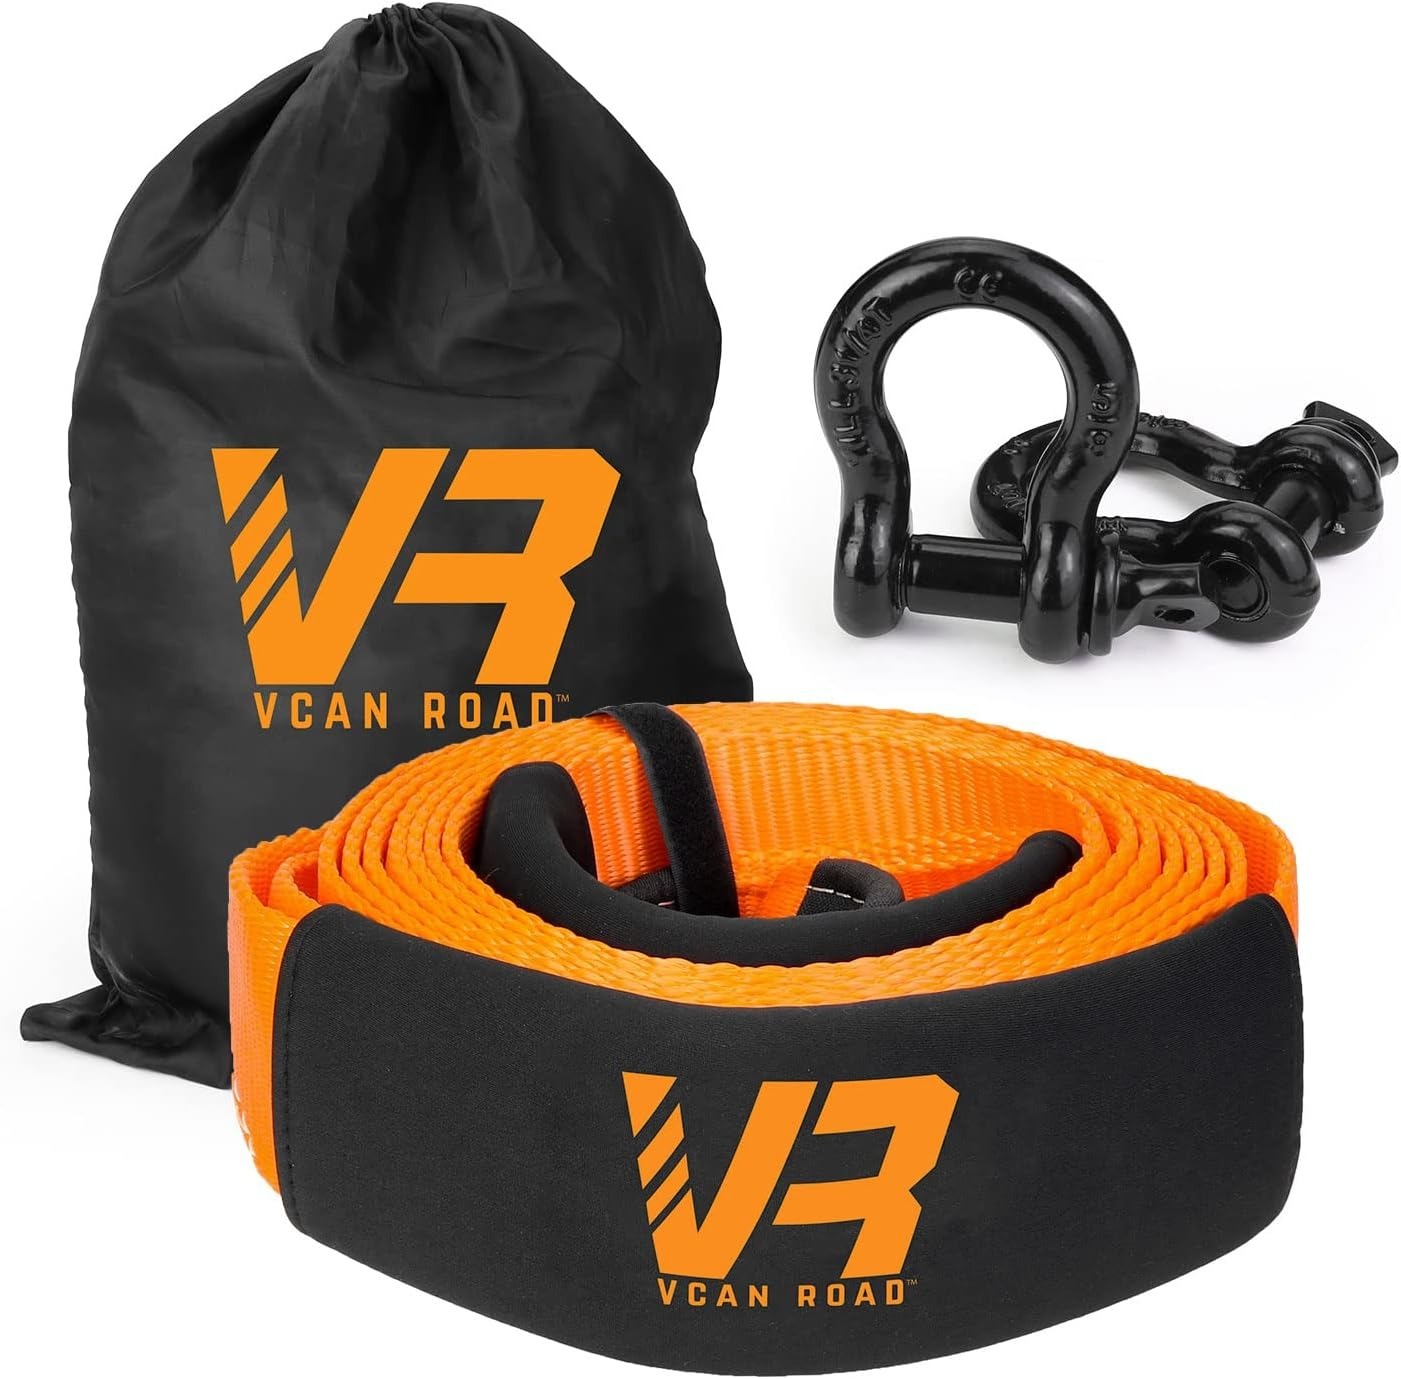 2" x 16.5' VCAN ROAD Heavy Duty Nylon Tow Strap w/ Hooks for Vehicle Recovery (20,000lbs Weight Capacity) $13 & More + Free Shipping